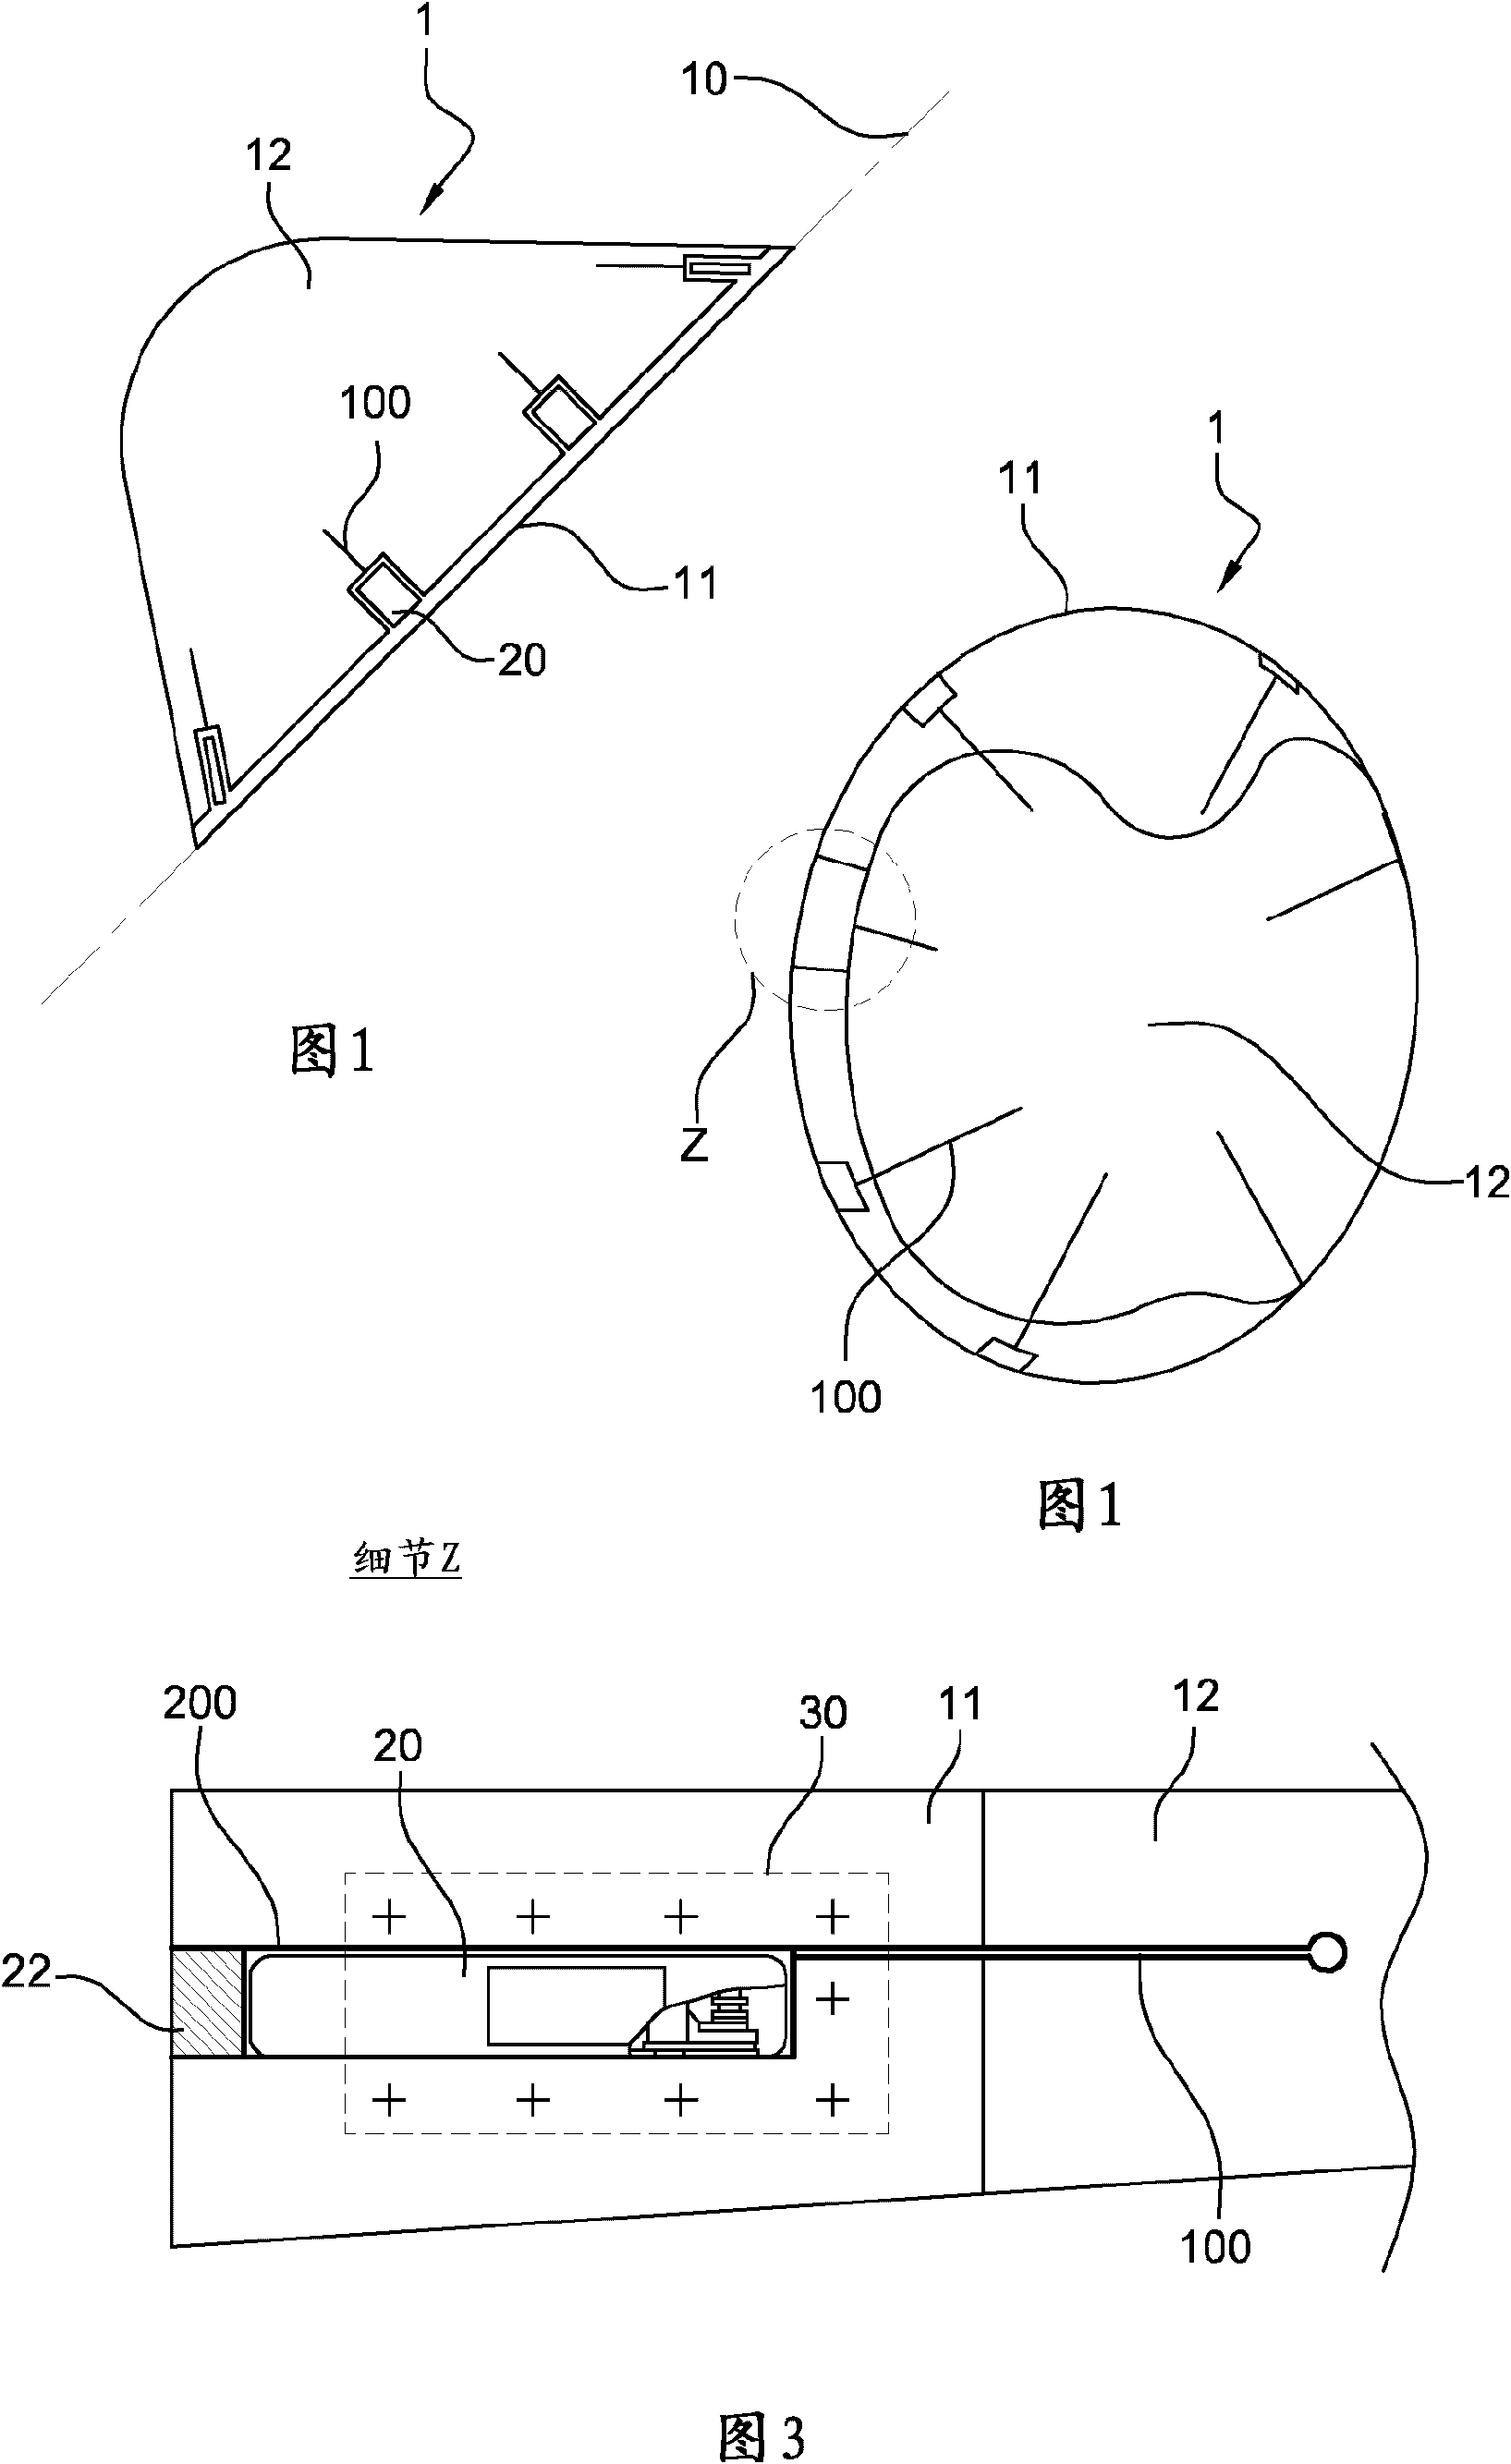 Radome and device for attaching said radome to an aircraft